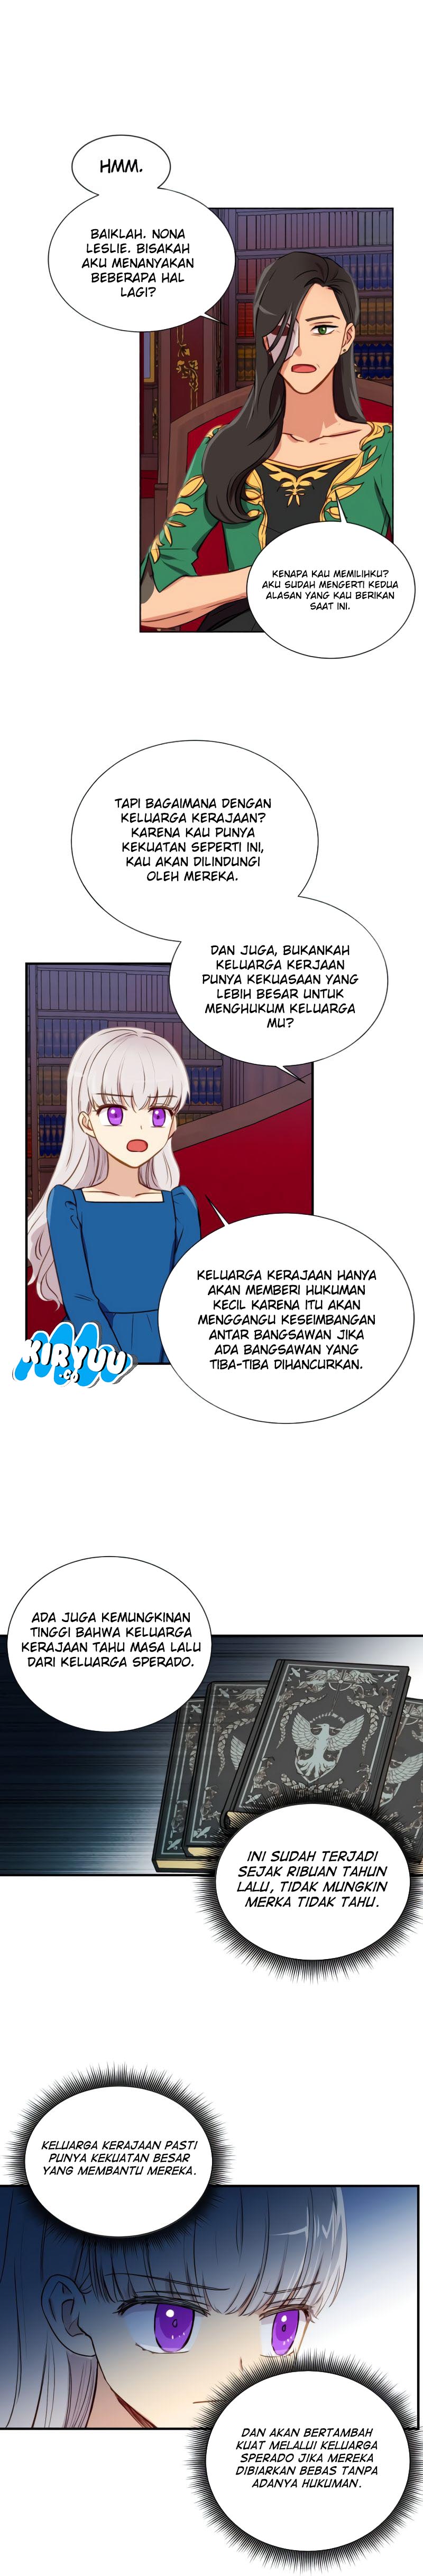 The Monster Duchess and Contract Princess Chapter 8